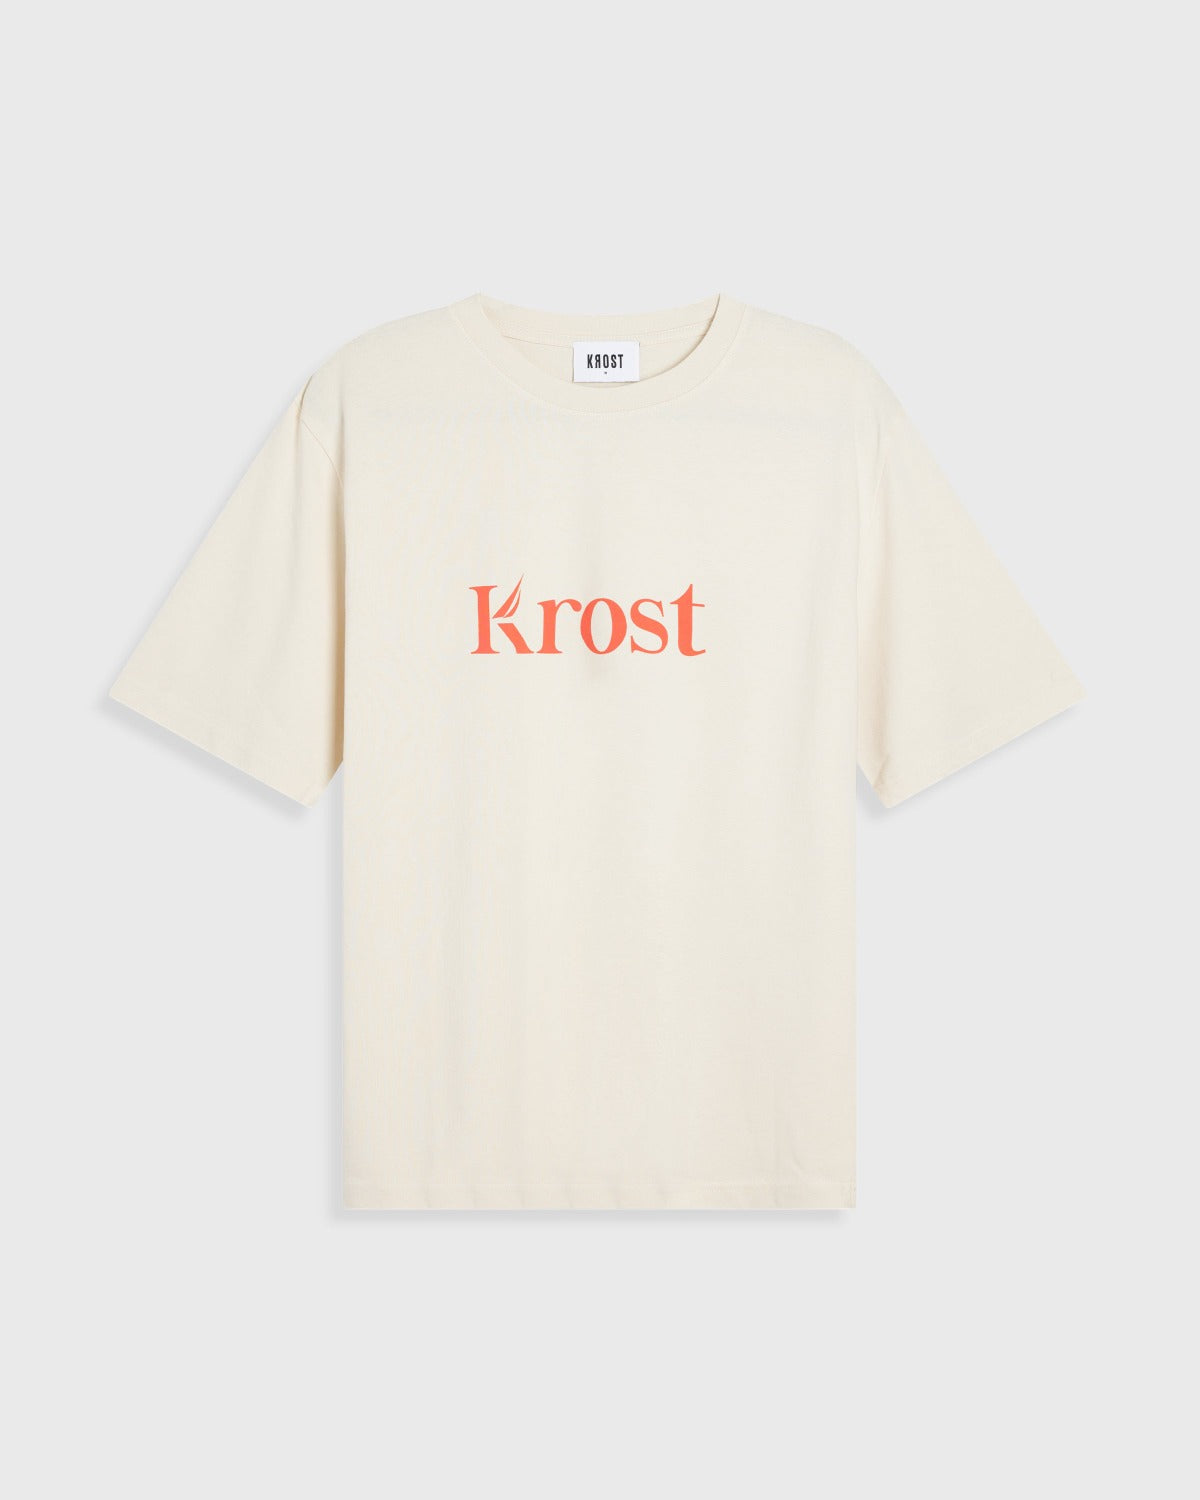 KROST x Nautica | Fair Winds graphic cream oversized 100% cotton tee high-quality fashion androgynous clothing for men & women t-shirts